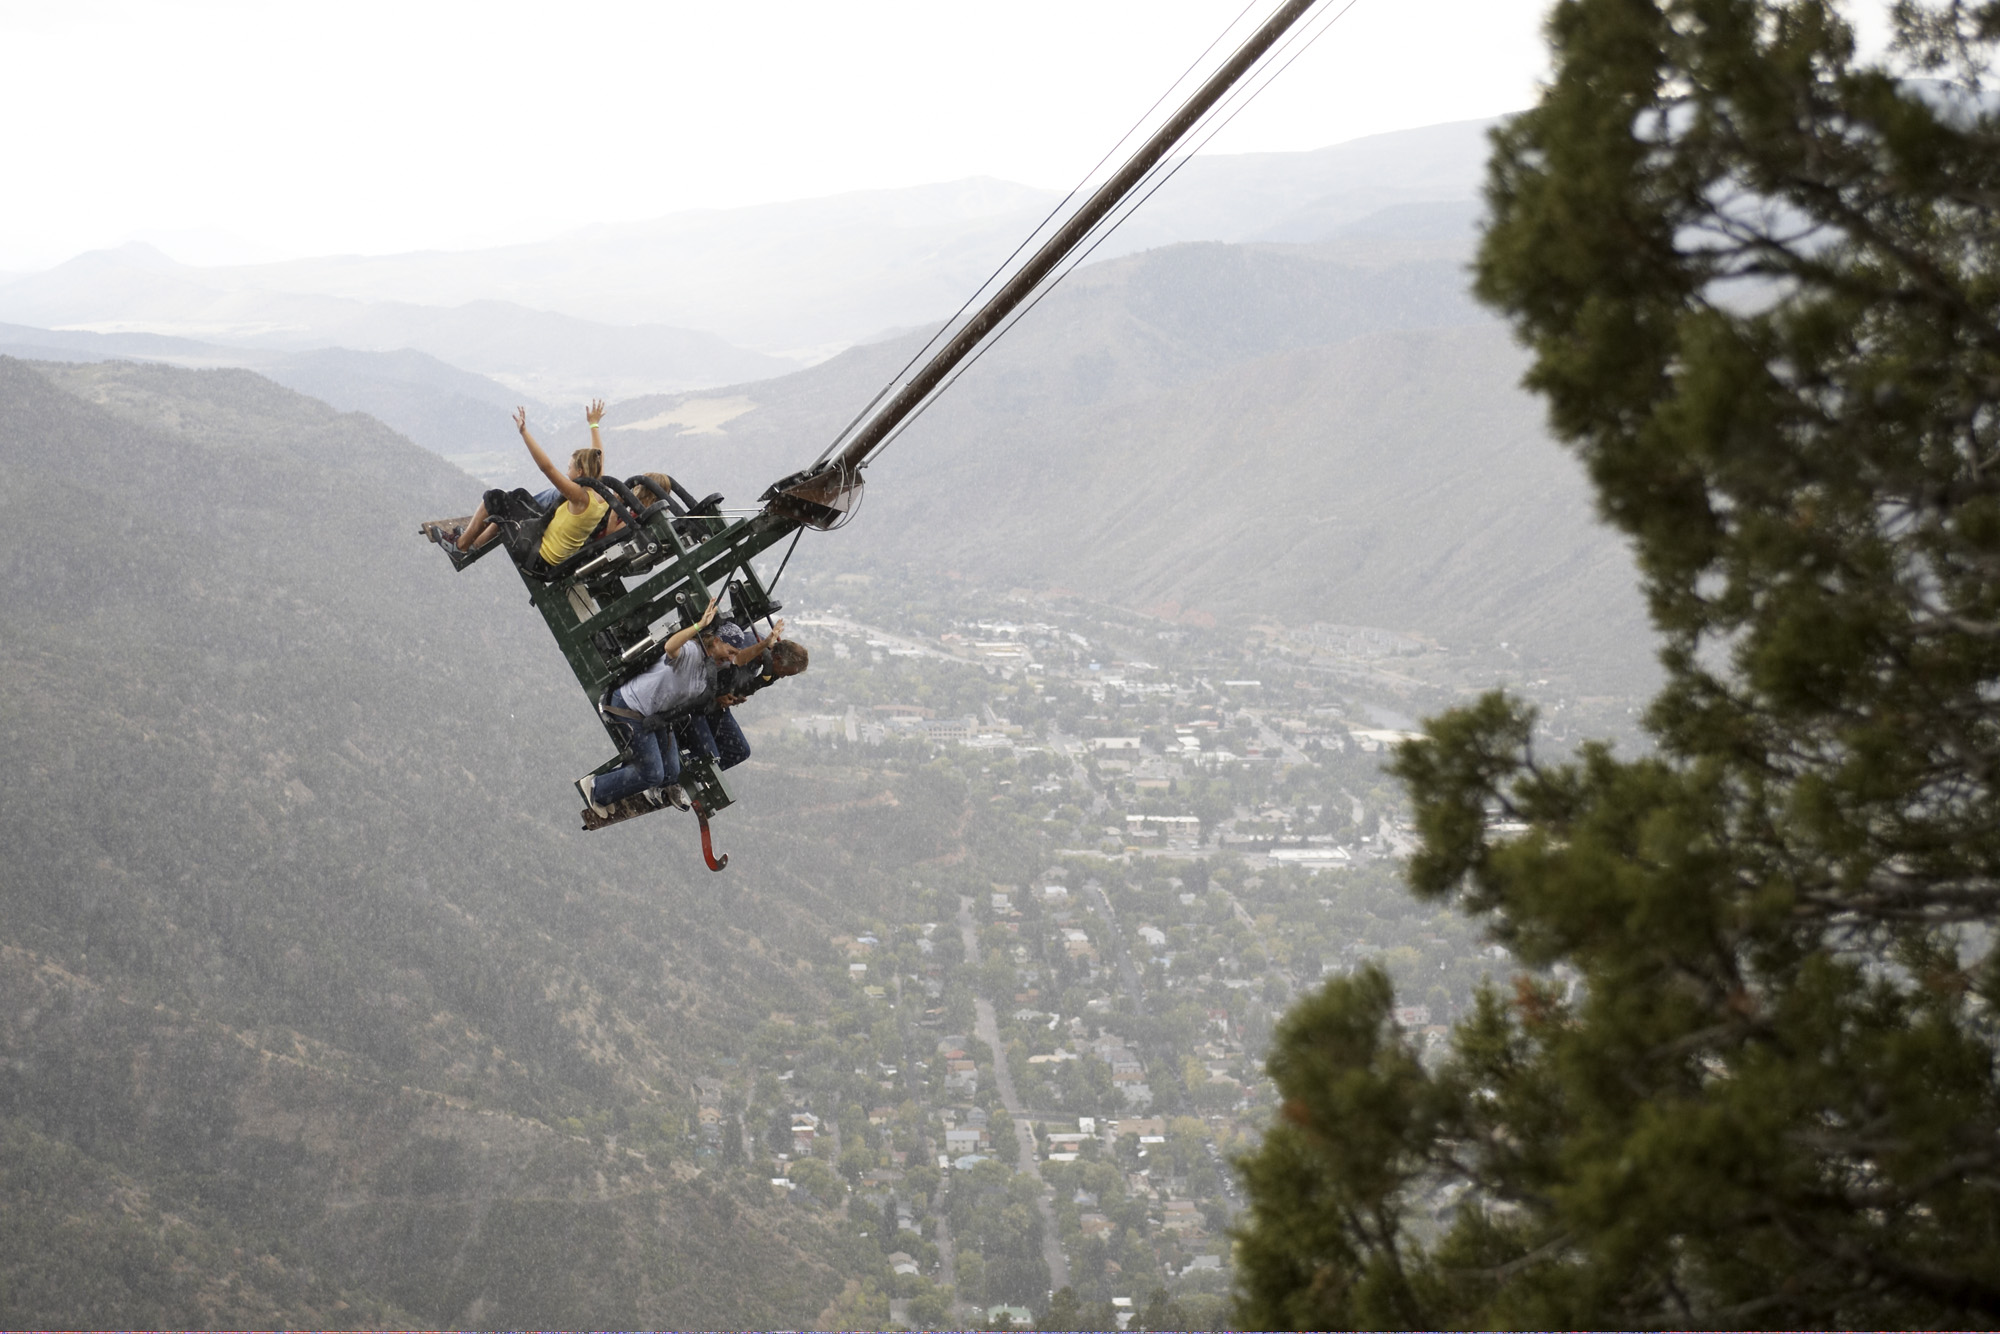 The Swing Shot launches brave riders out over Glenwood Canyon